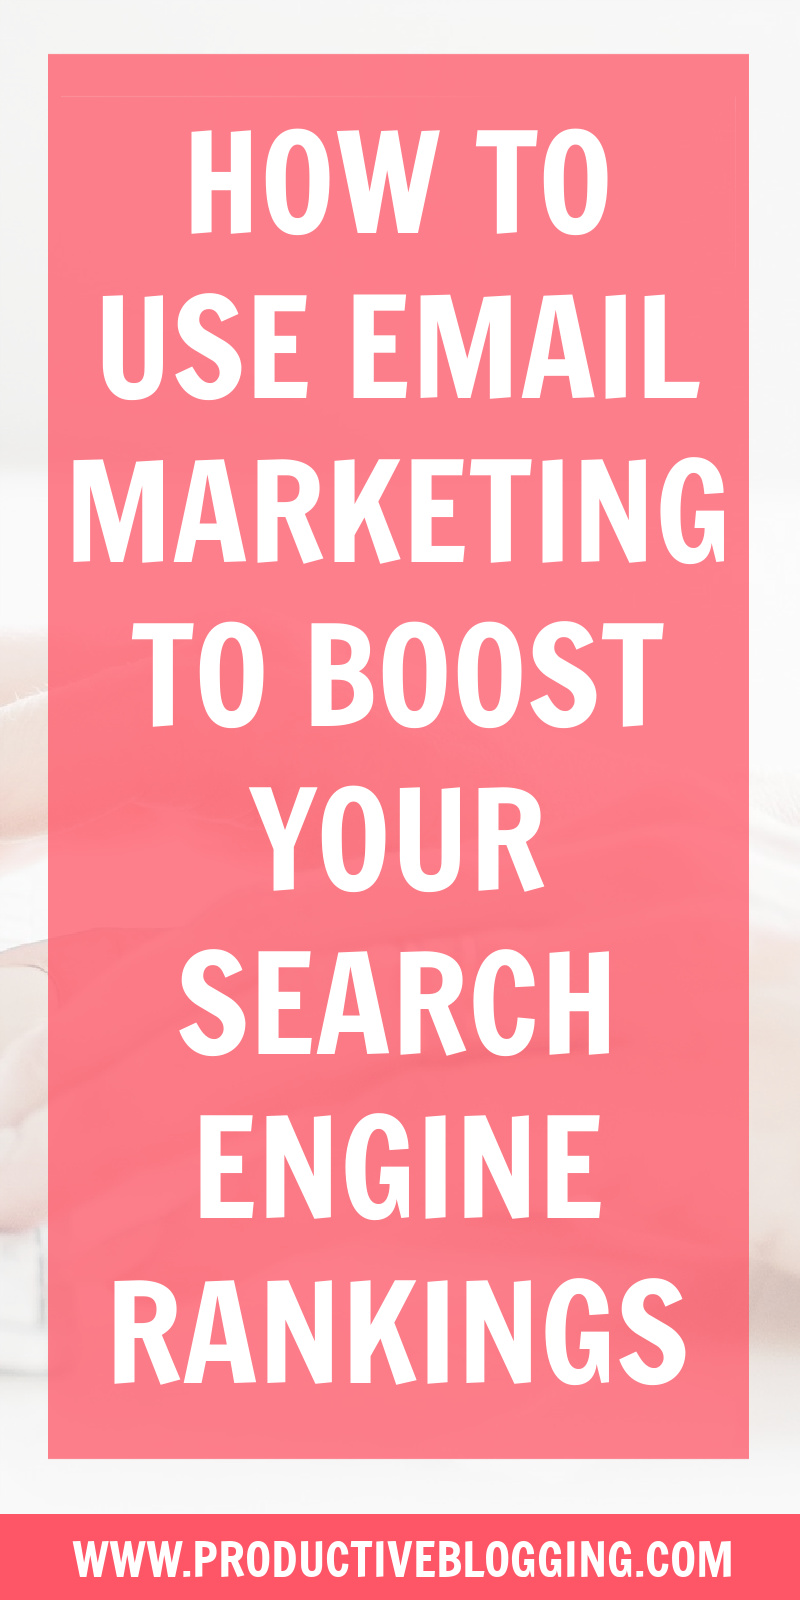 Did you know, email marketing is a powerful SEO tool? Email marketing can boost your search engine rankings AND help you get more benefit from your SEO traffic. Here’s how… #emailmarketing #SEO #emailSEO #SEOtips #SEOtool #searchengineoptimization #SEOforbloggers #growyourblog #bloggrowth #bloggingtips #blogtips #blogging #bloggers #productivity #productivitytips #productiveblogging #blogsmarternotharder